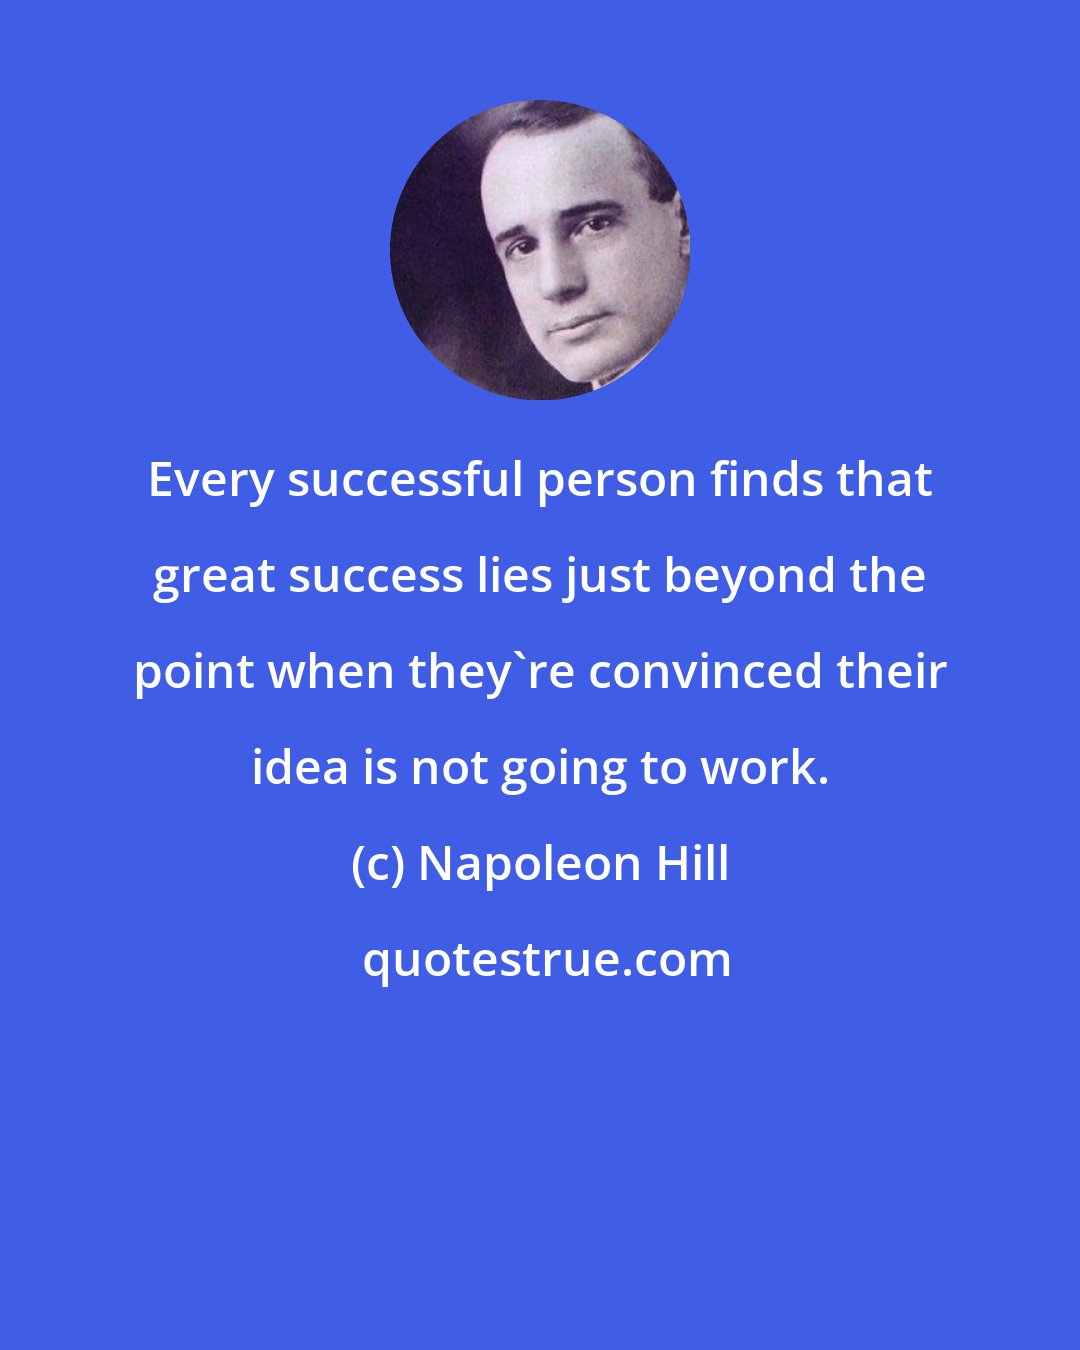 Napoleon Hill: Every successful person finds that great success lies just beyond the point when they're convinced their idea is not going to work.